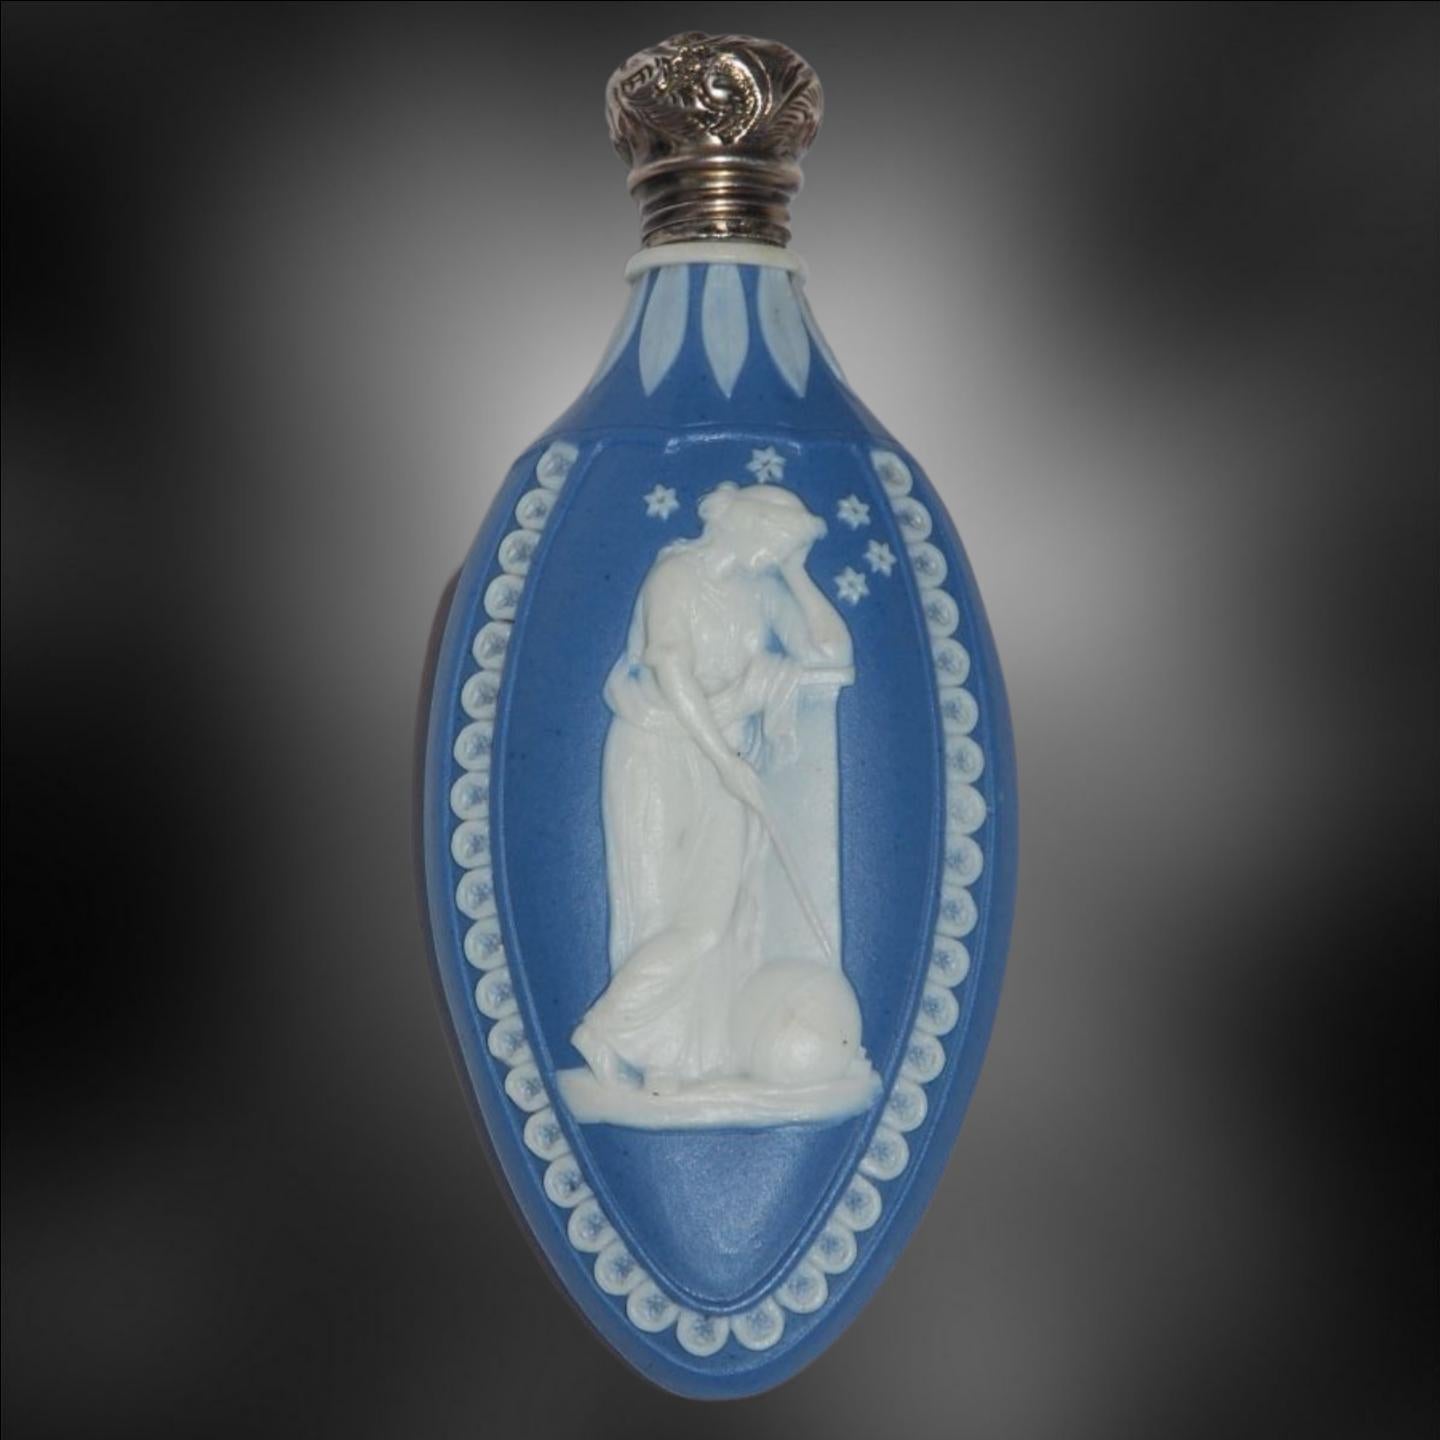 A scent bottle in cobalt blue jasperware, with original silver Cap and dipper.

In solid blue jasper, with the muses Urania and Euterpe: Astronomy and Lyric Poetry. Once the formula became known, Neale produced high quality jasperware, as in this